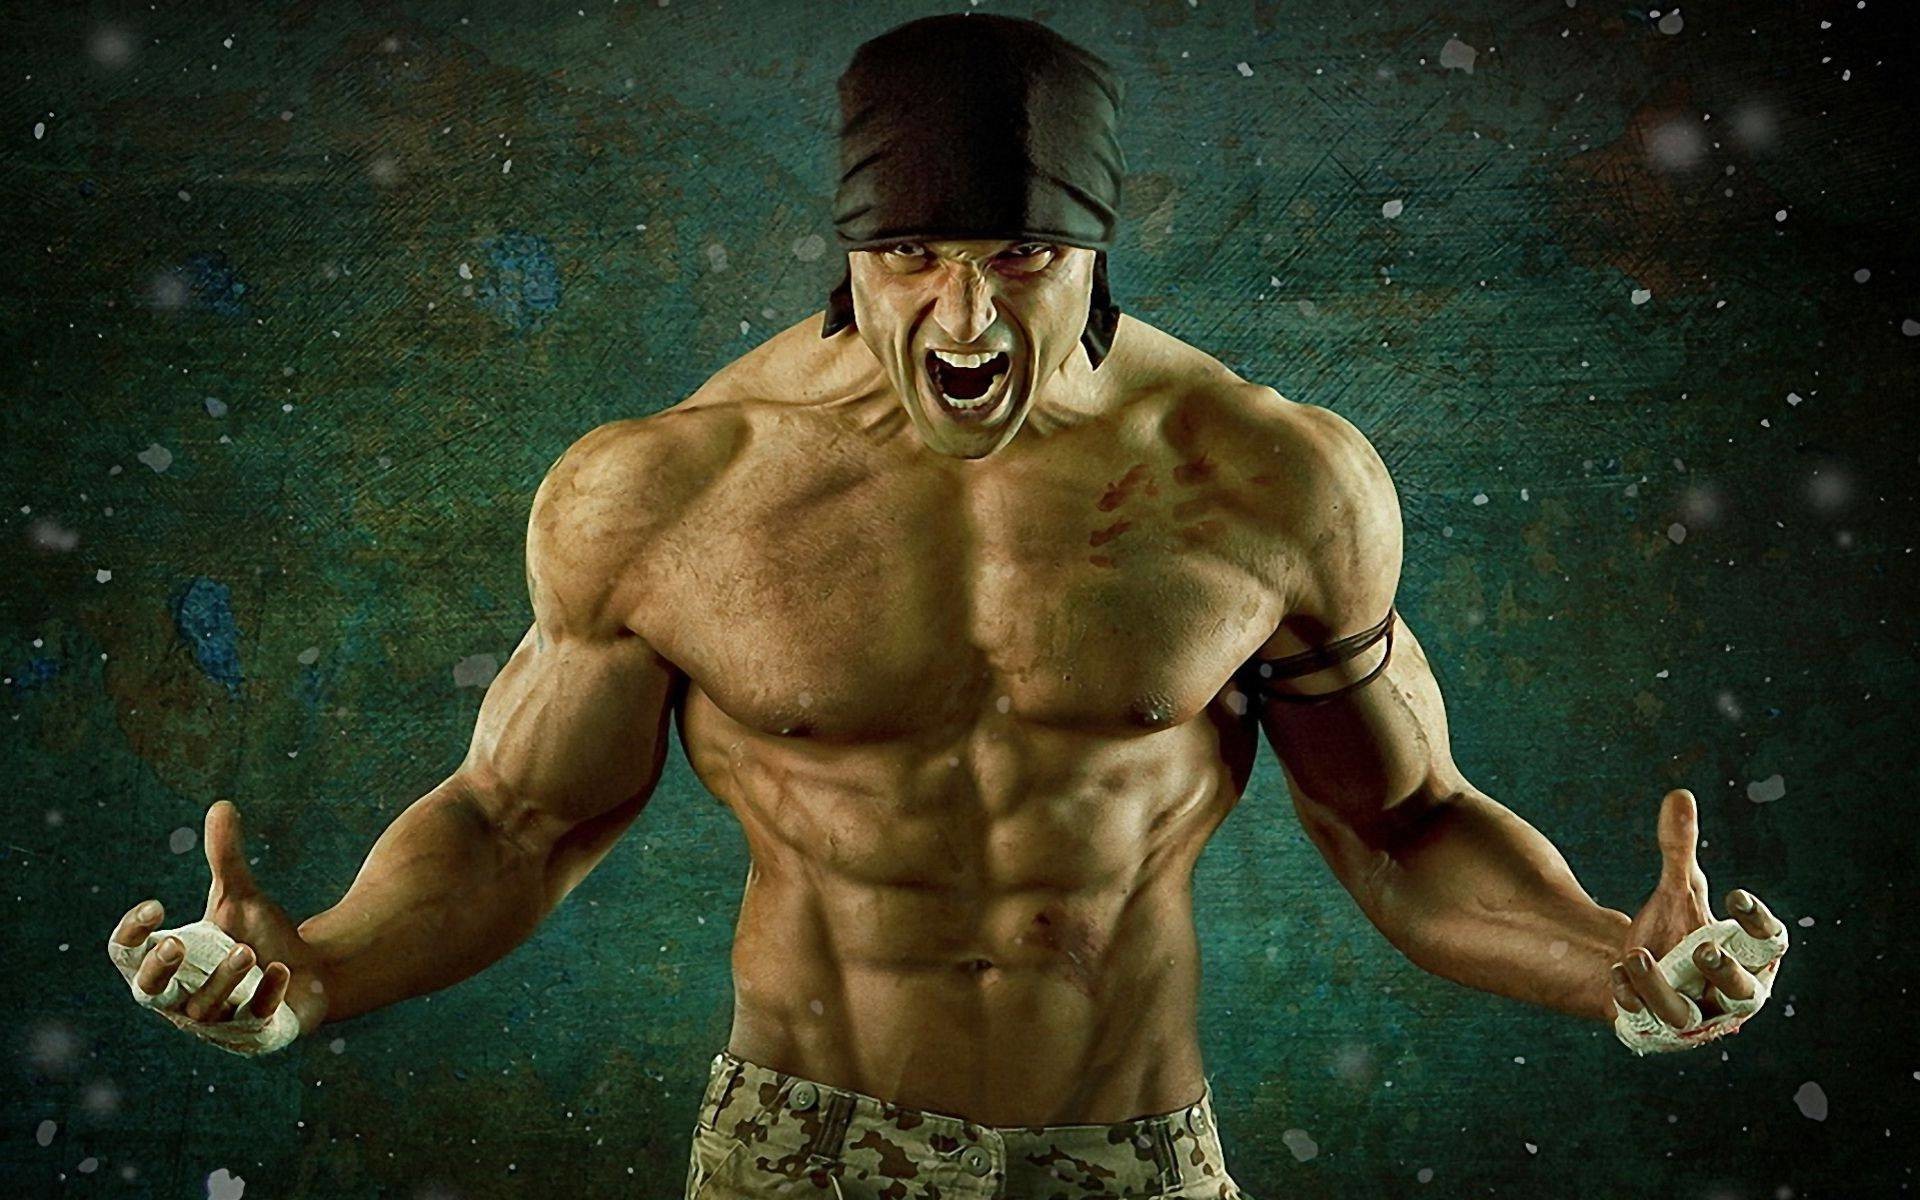 1920x1200 Muscle Wallpapers, HQFX Muscle Wallpapers for Free, Wallpapers